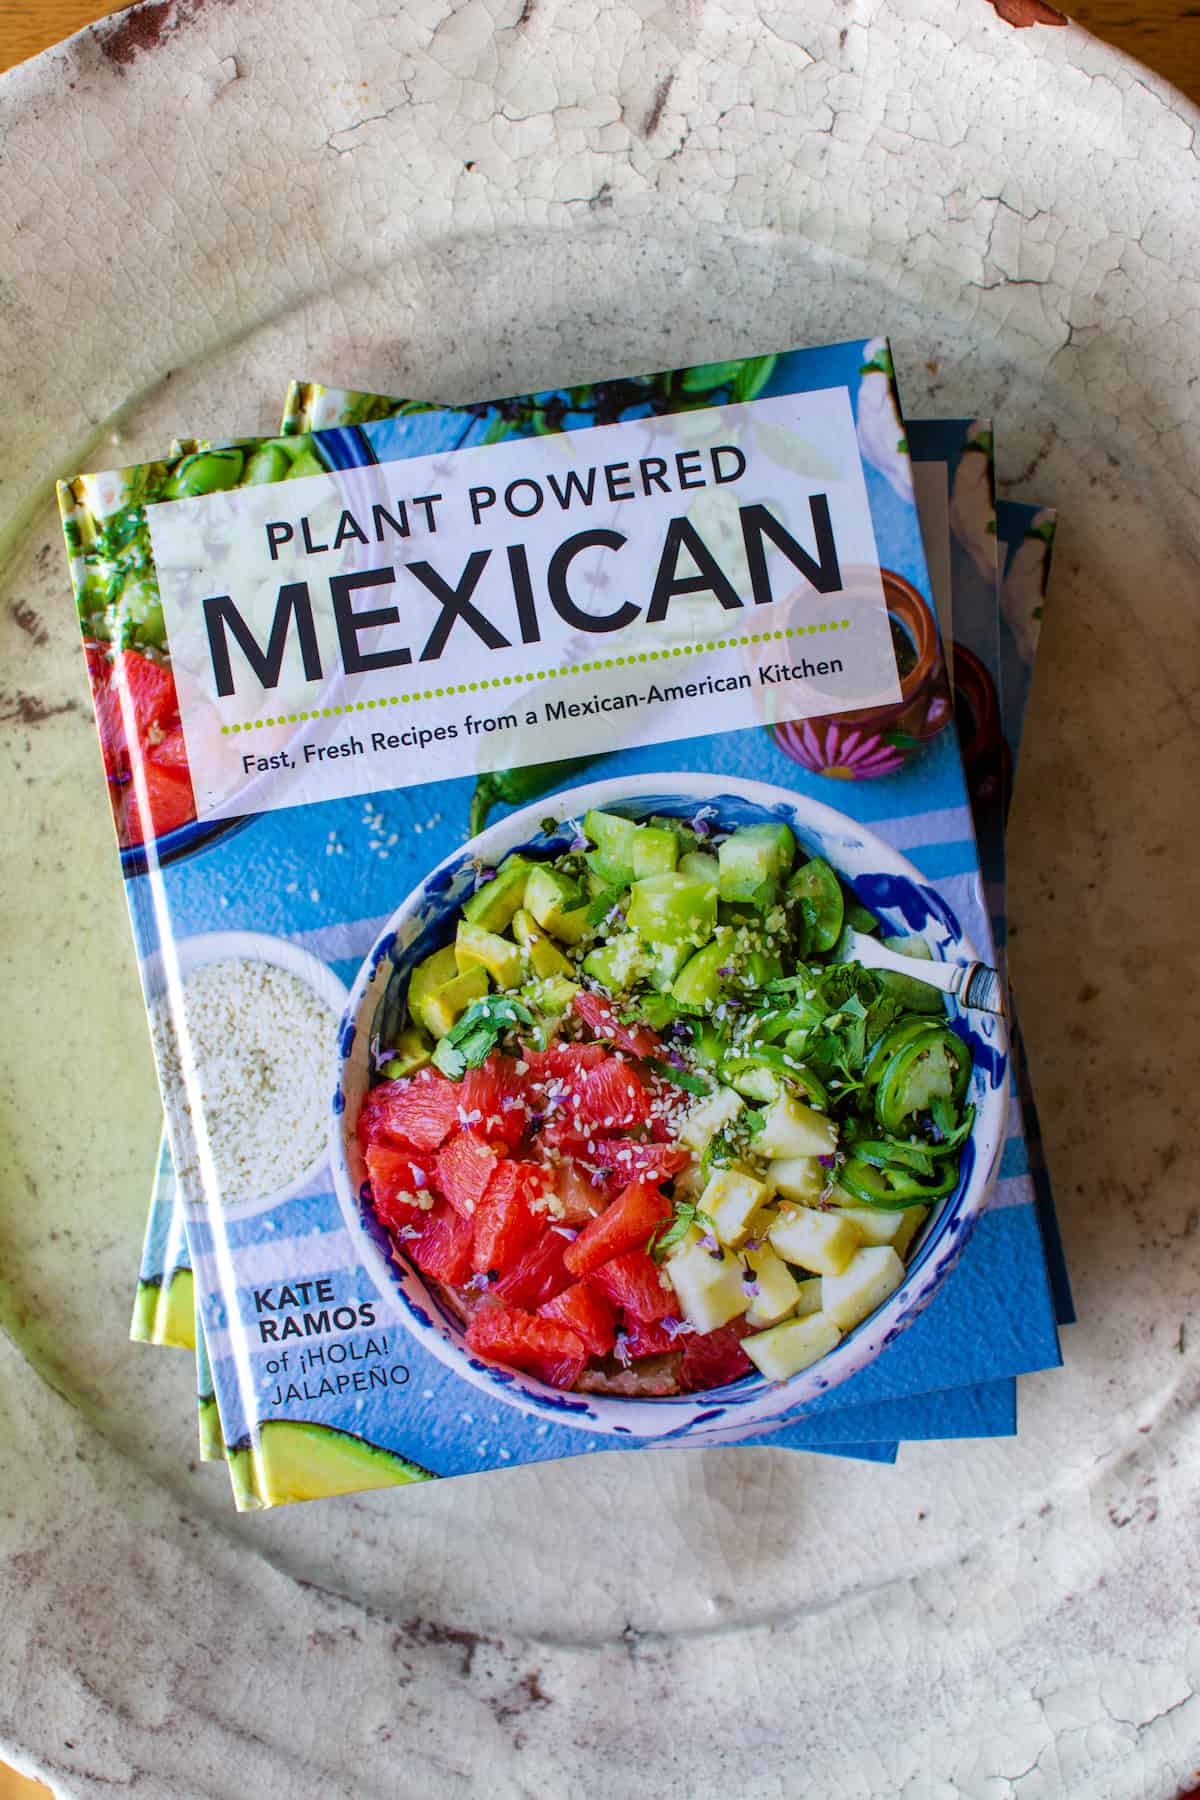 Plant Powered Mexican cookbook sitting on a white ceramic bowl.